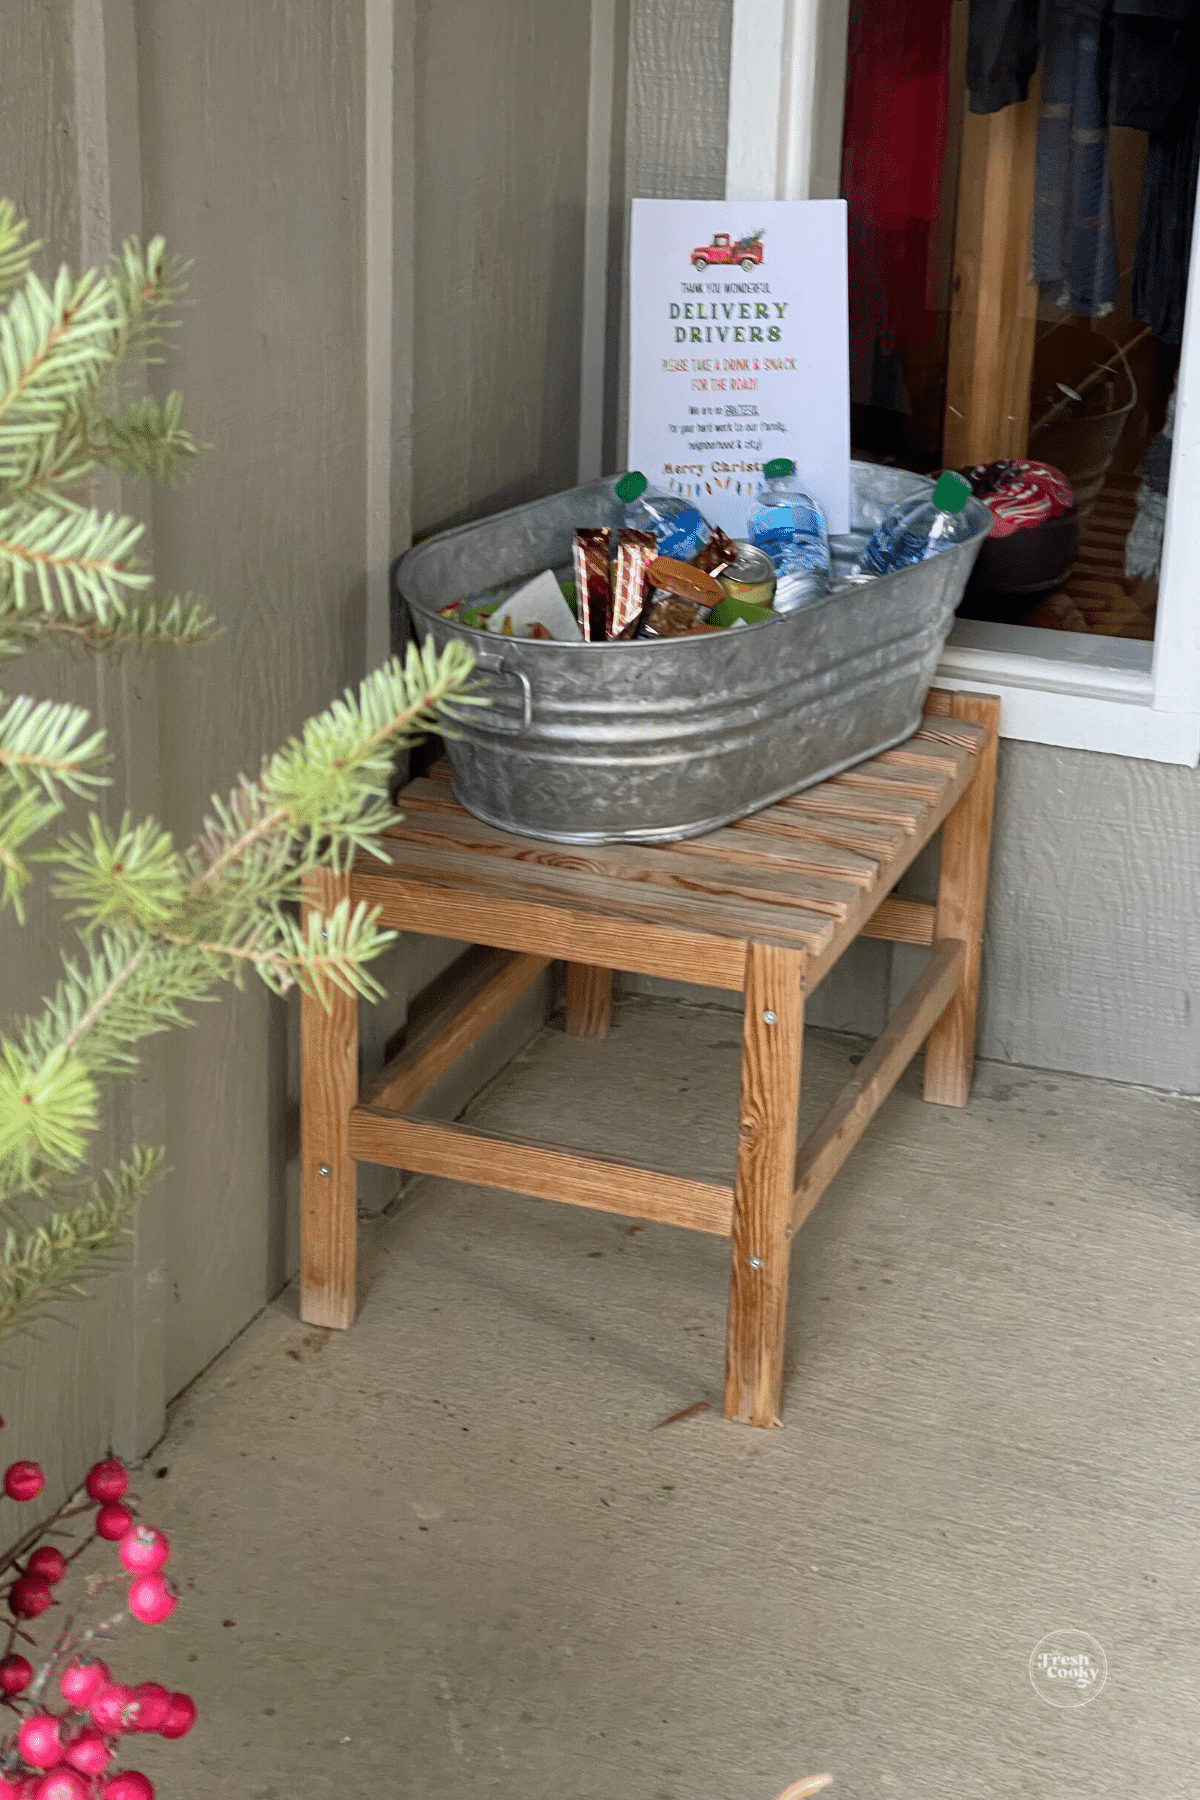 Delivery Drivers snack station on front porch.